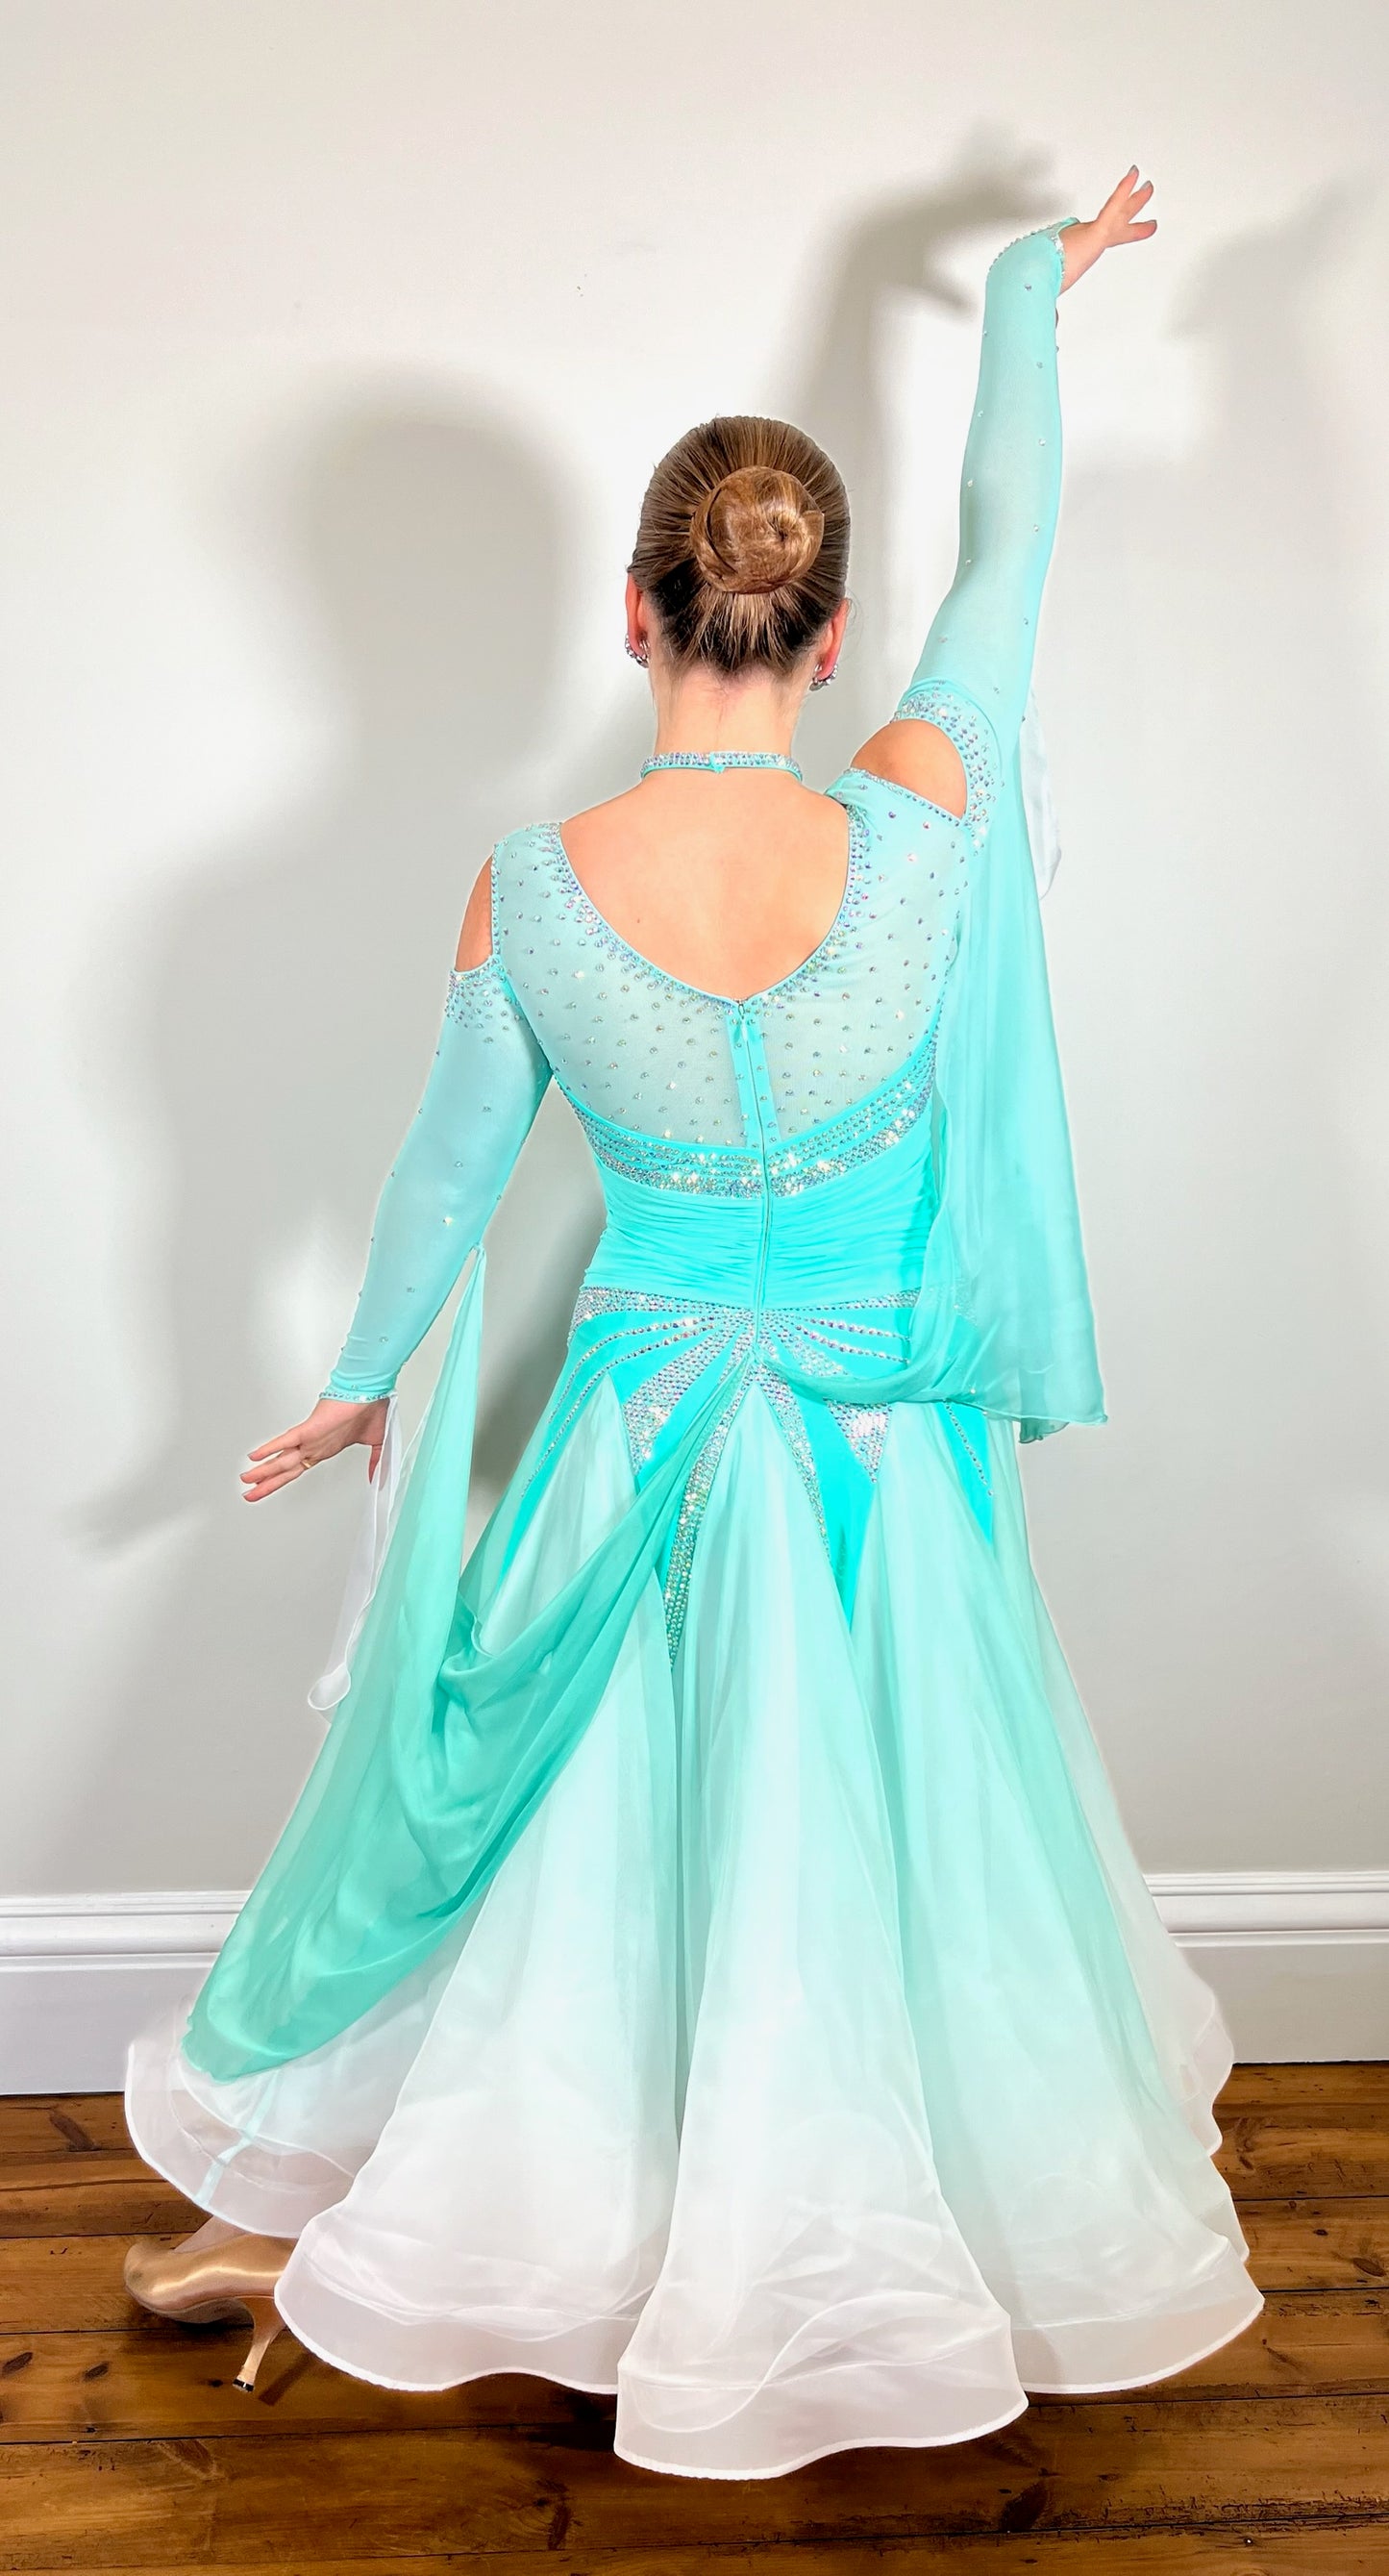 054 Spearmint Green & White Ombre Competition Ballroom Dance Dress. Rouched panel to the waist area. High back with cold shoulder sleeves. Stoned in AB with detachable floats